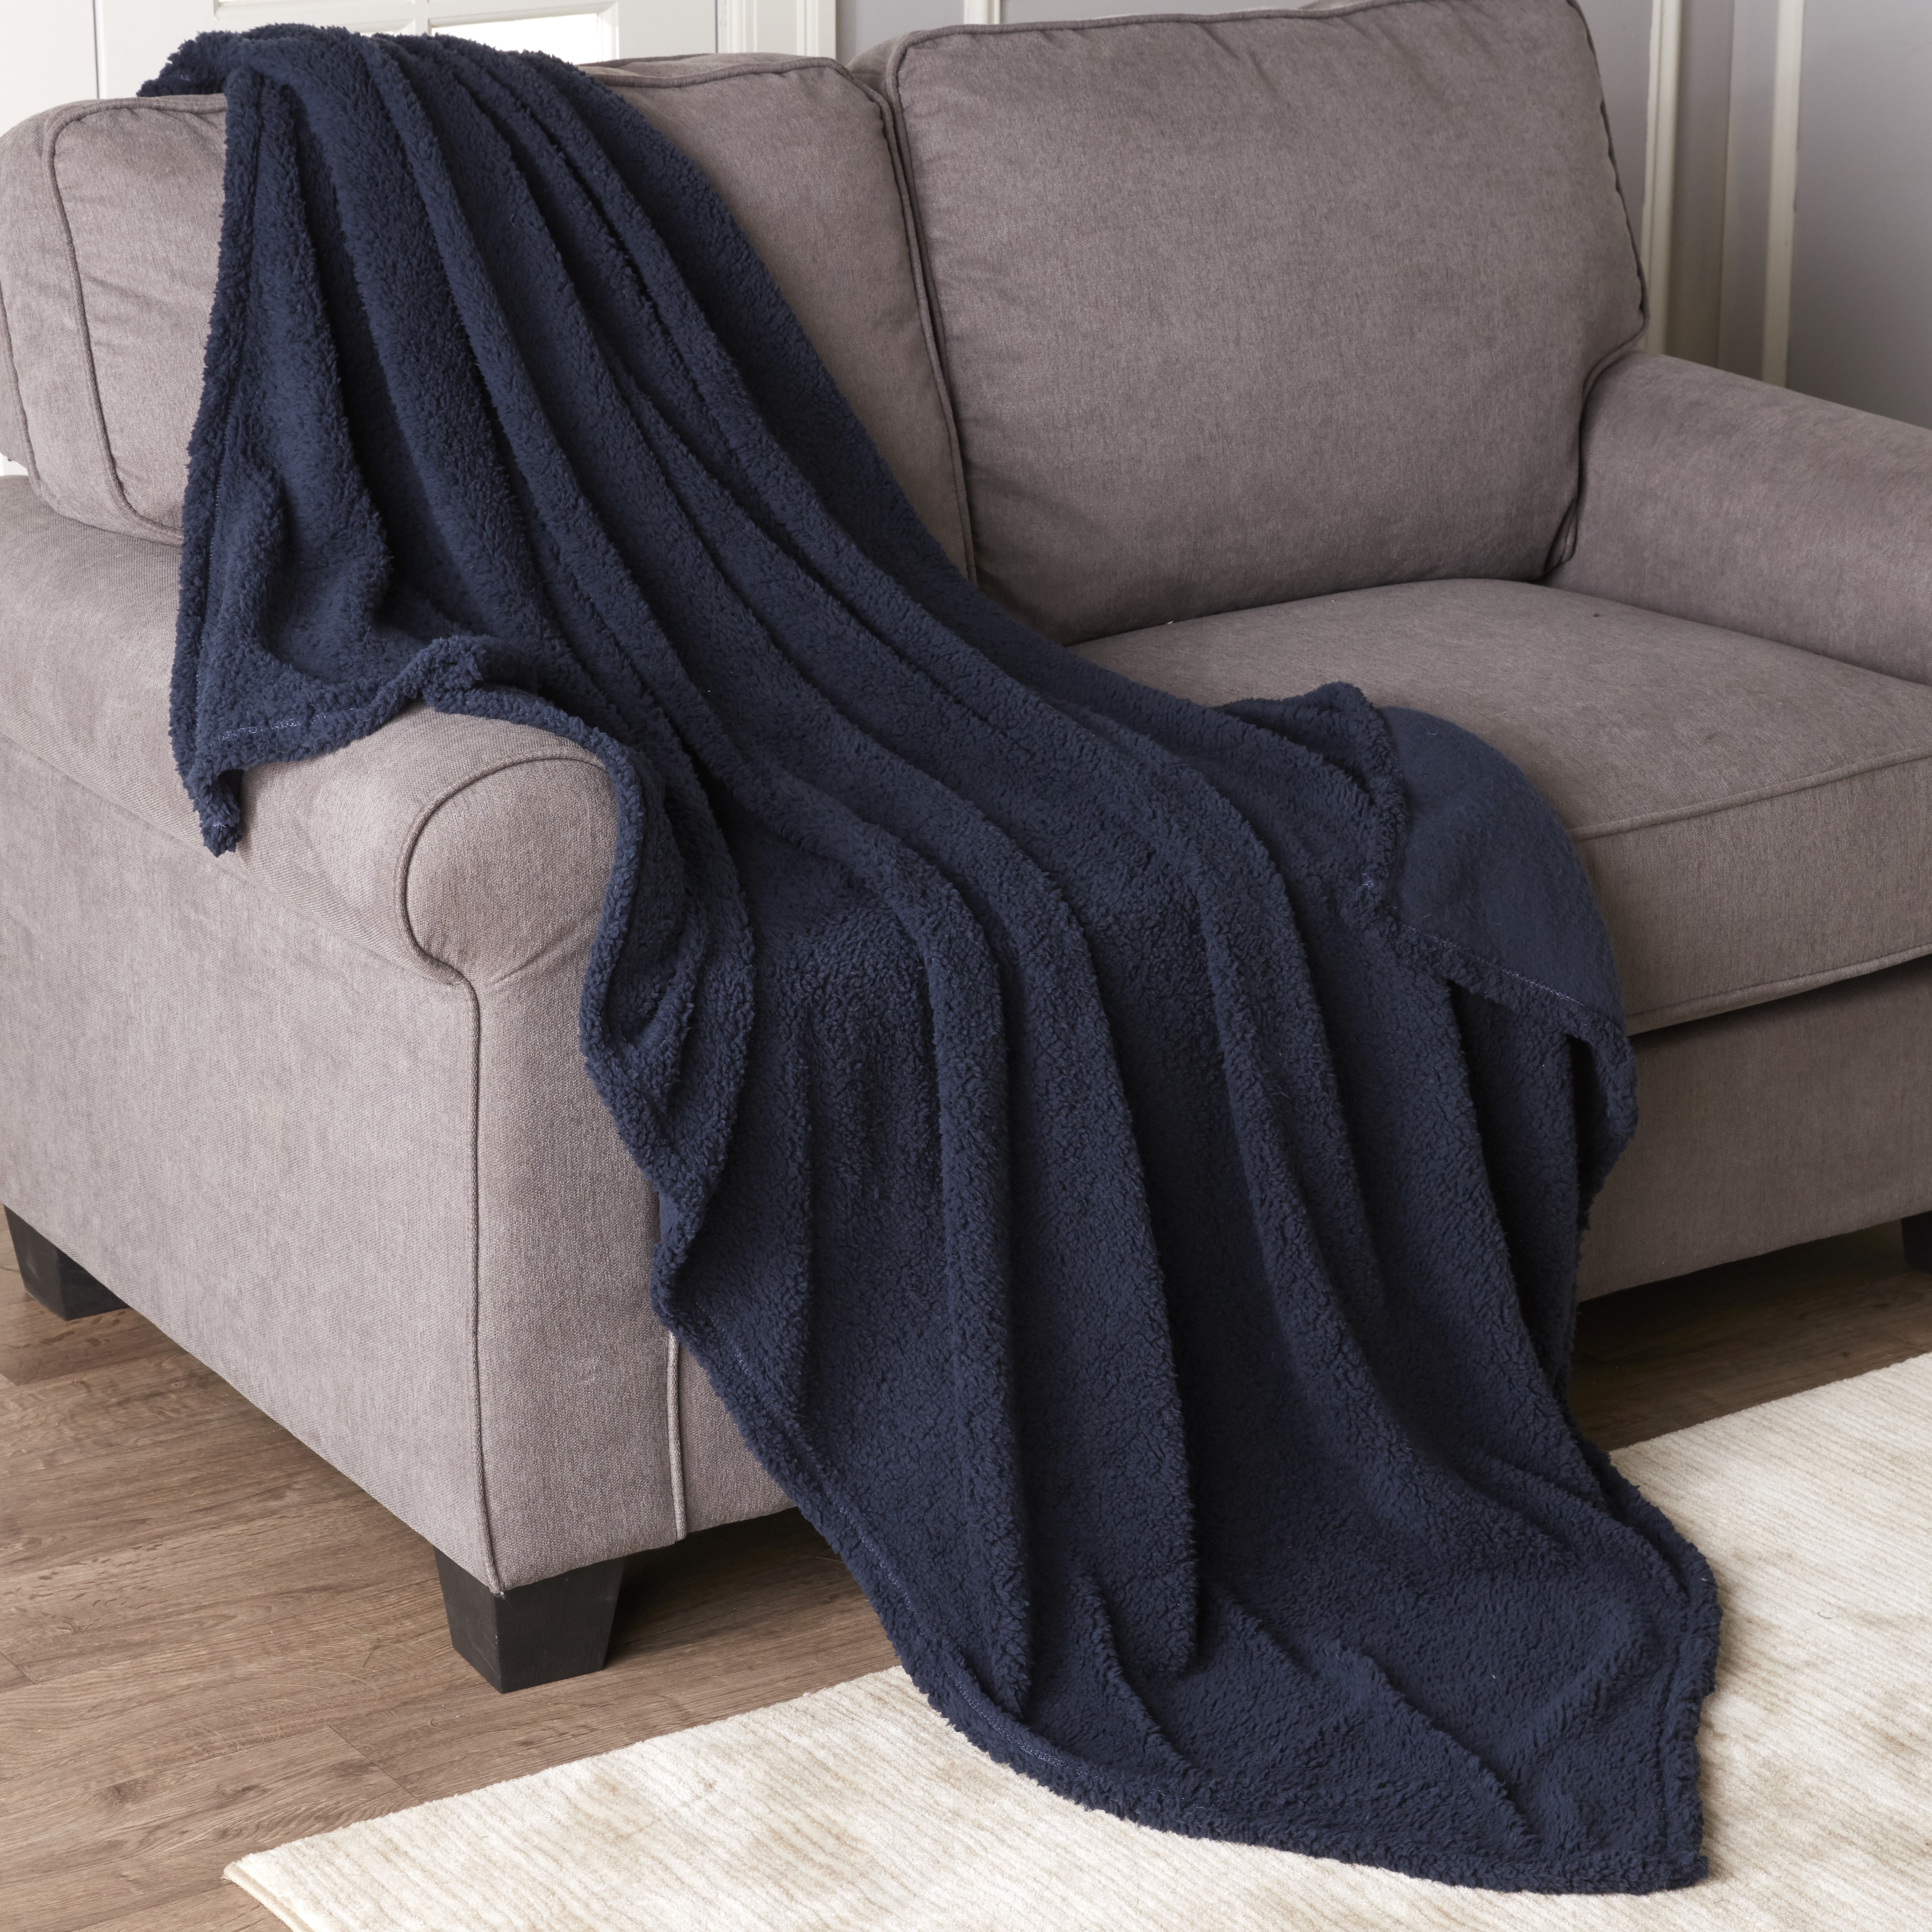 Soft Flannel Fleece Blanket Throw Sofa Couch Bed Rug Throws 110x150cm 